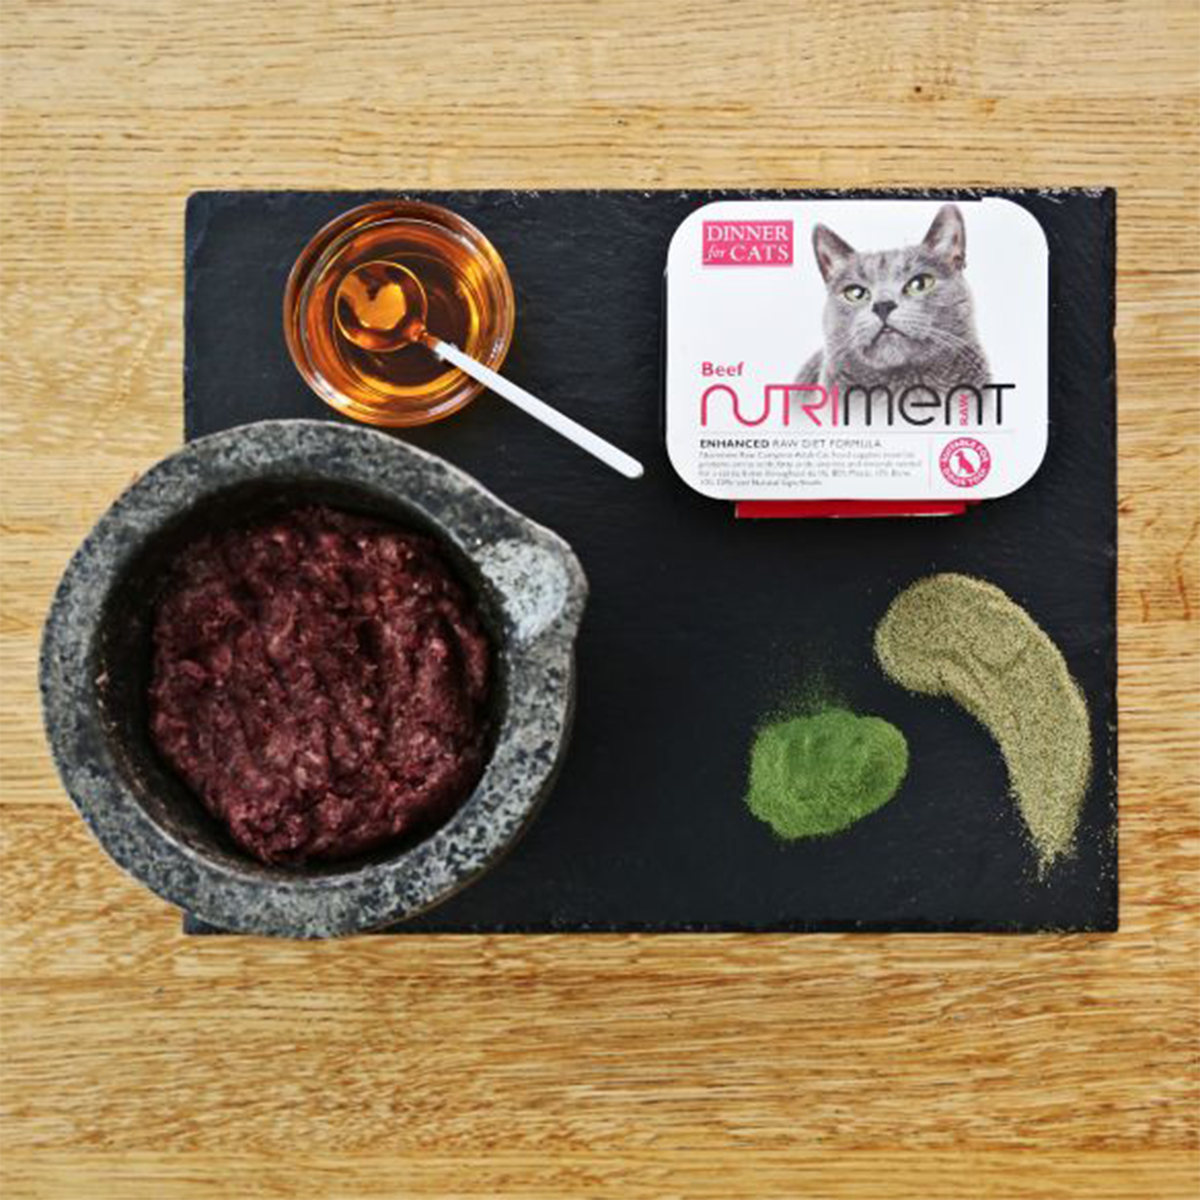 Nutriment Dinner for Cats - Beef Complete